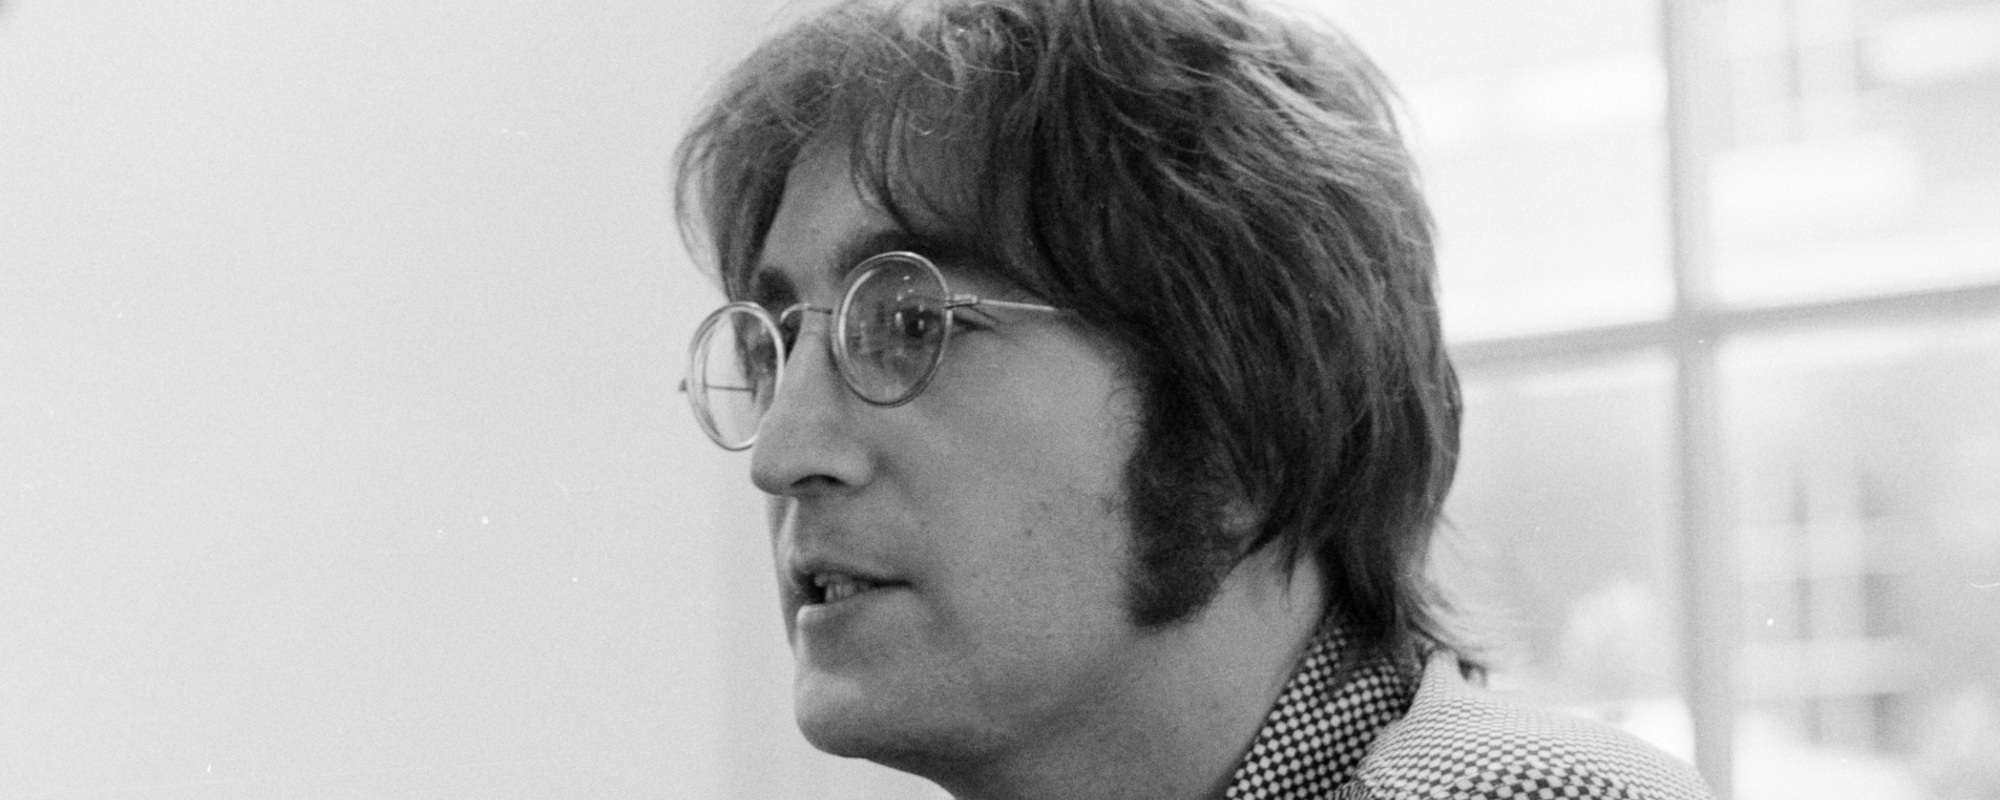 3 Songs You Didn’t Know John Lennon Wrote for Other Artists